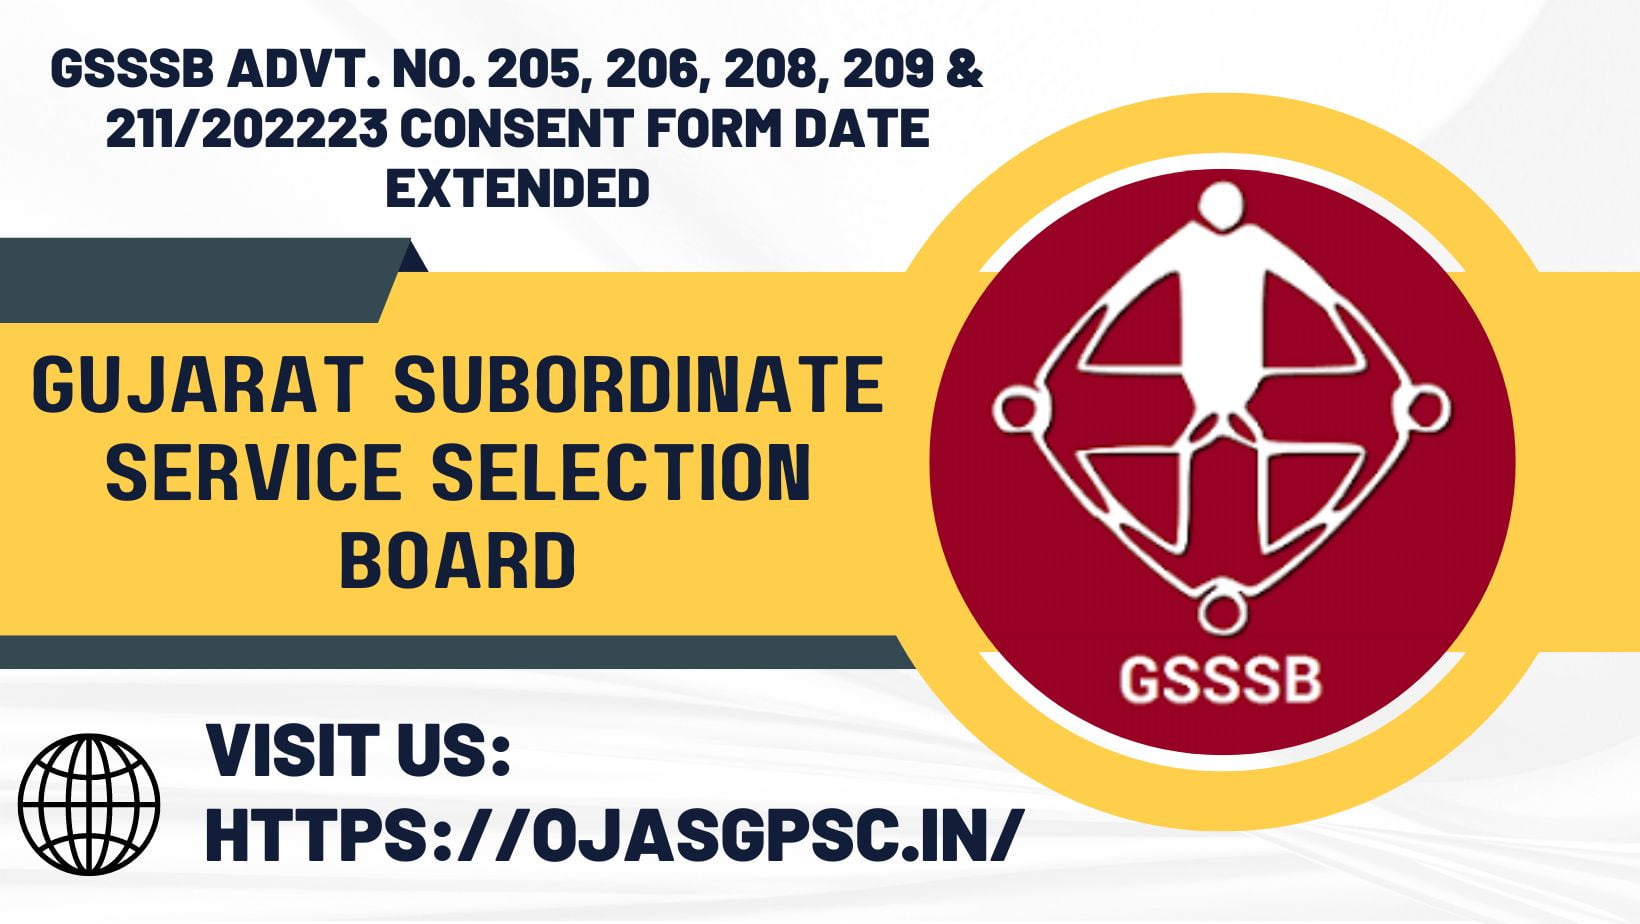 GSSSB Advt. No. 205, 206, 208, 209 & 211/202223 Consent Form Date Extended